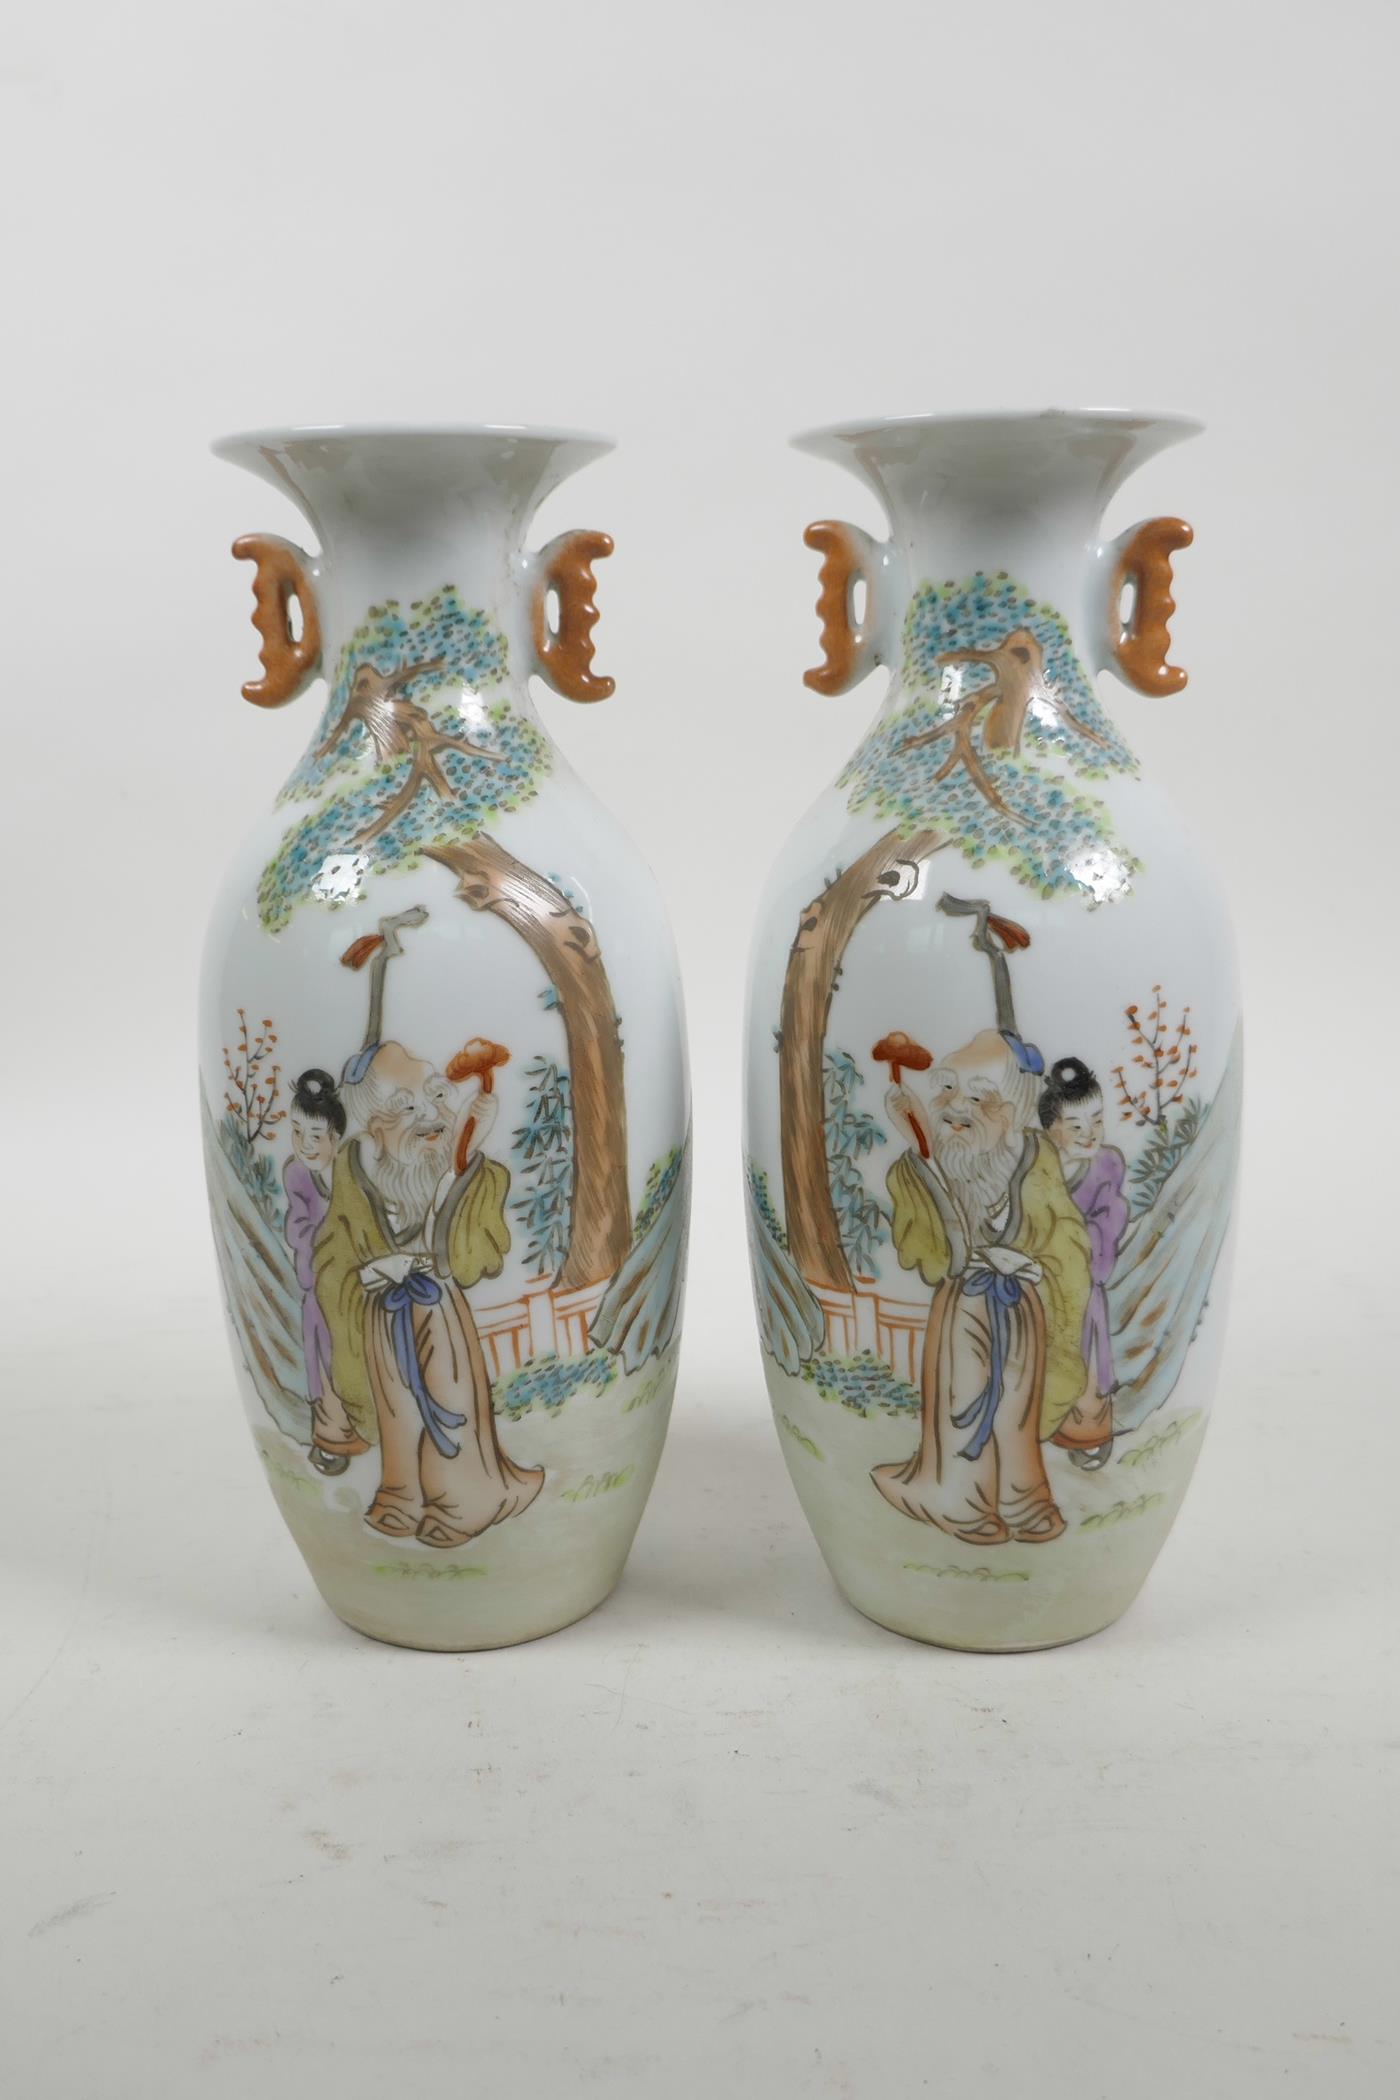 A pair of Chinese Republic famille rose porcelain vases with two handles, decorated with a sage and